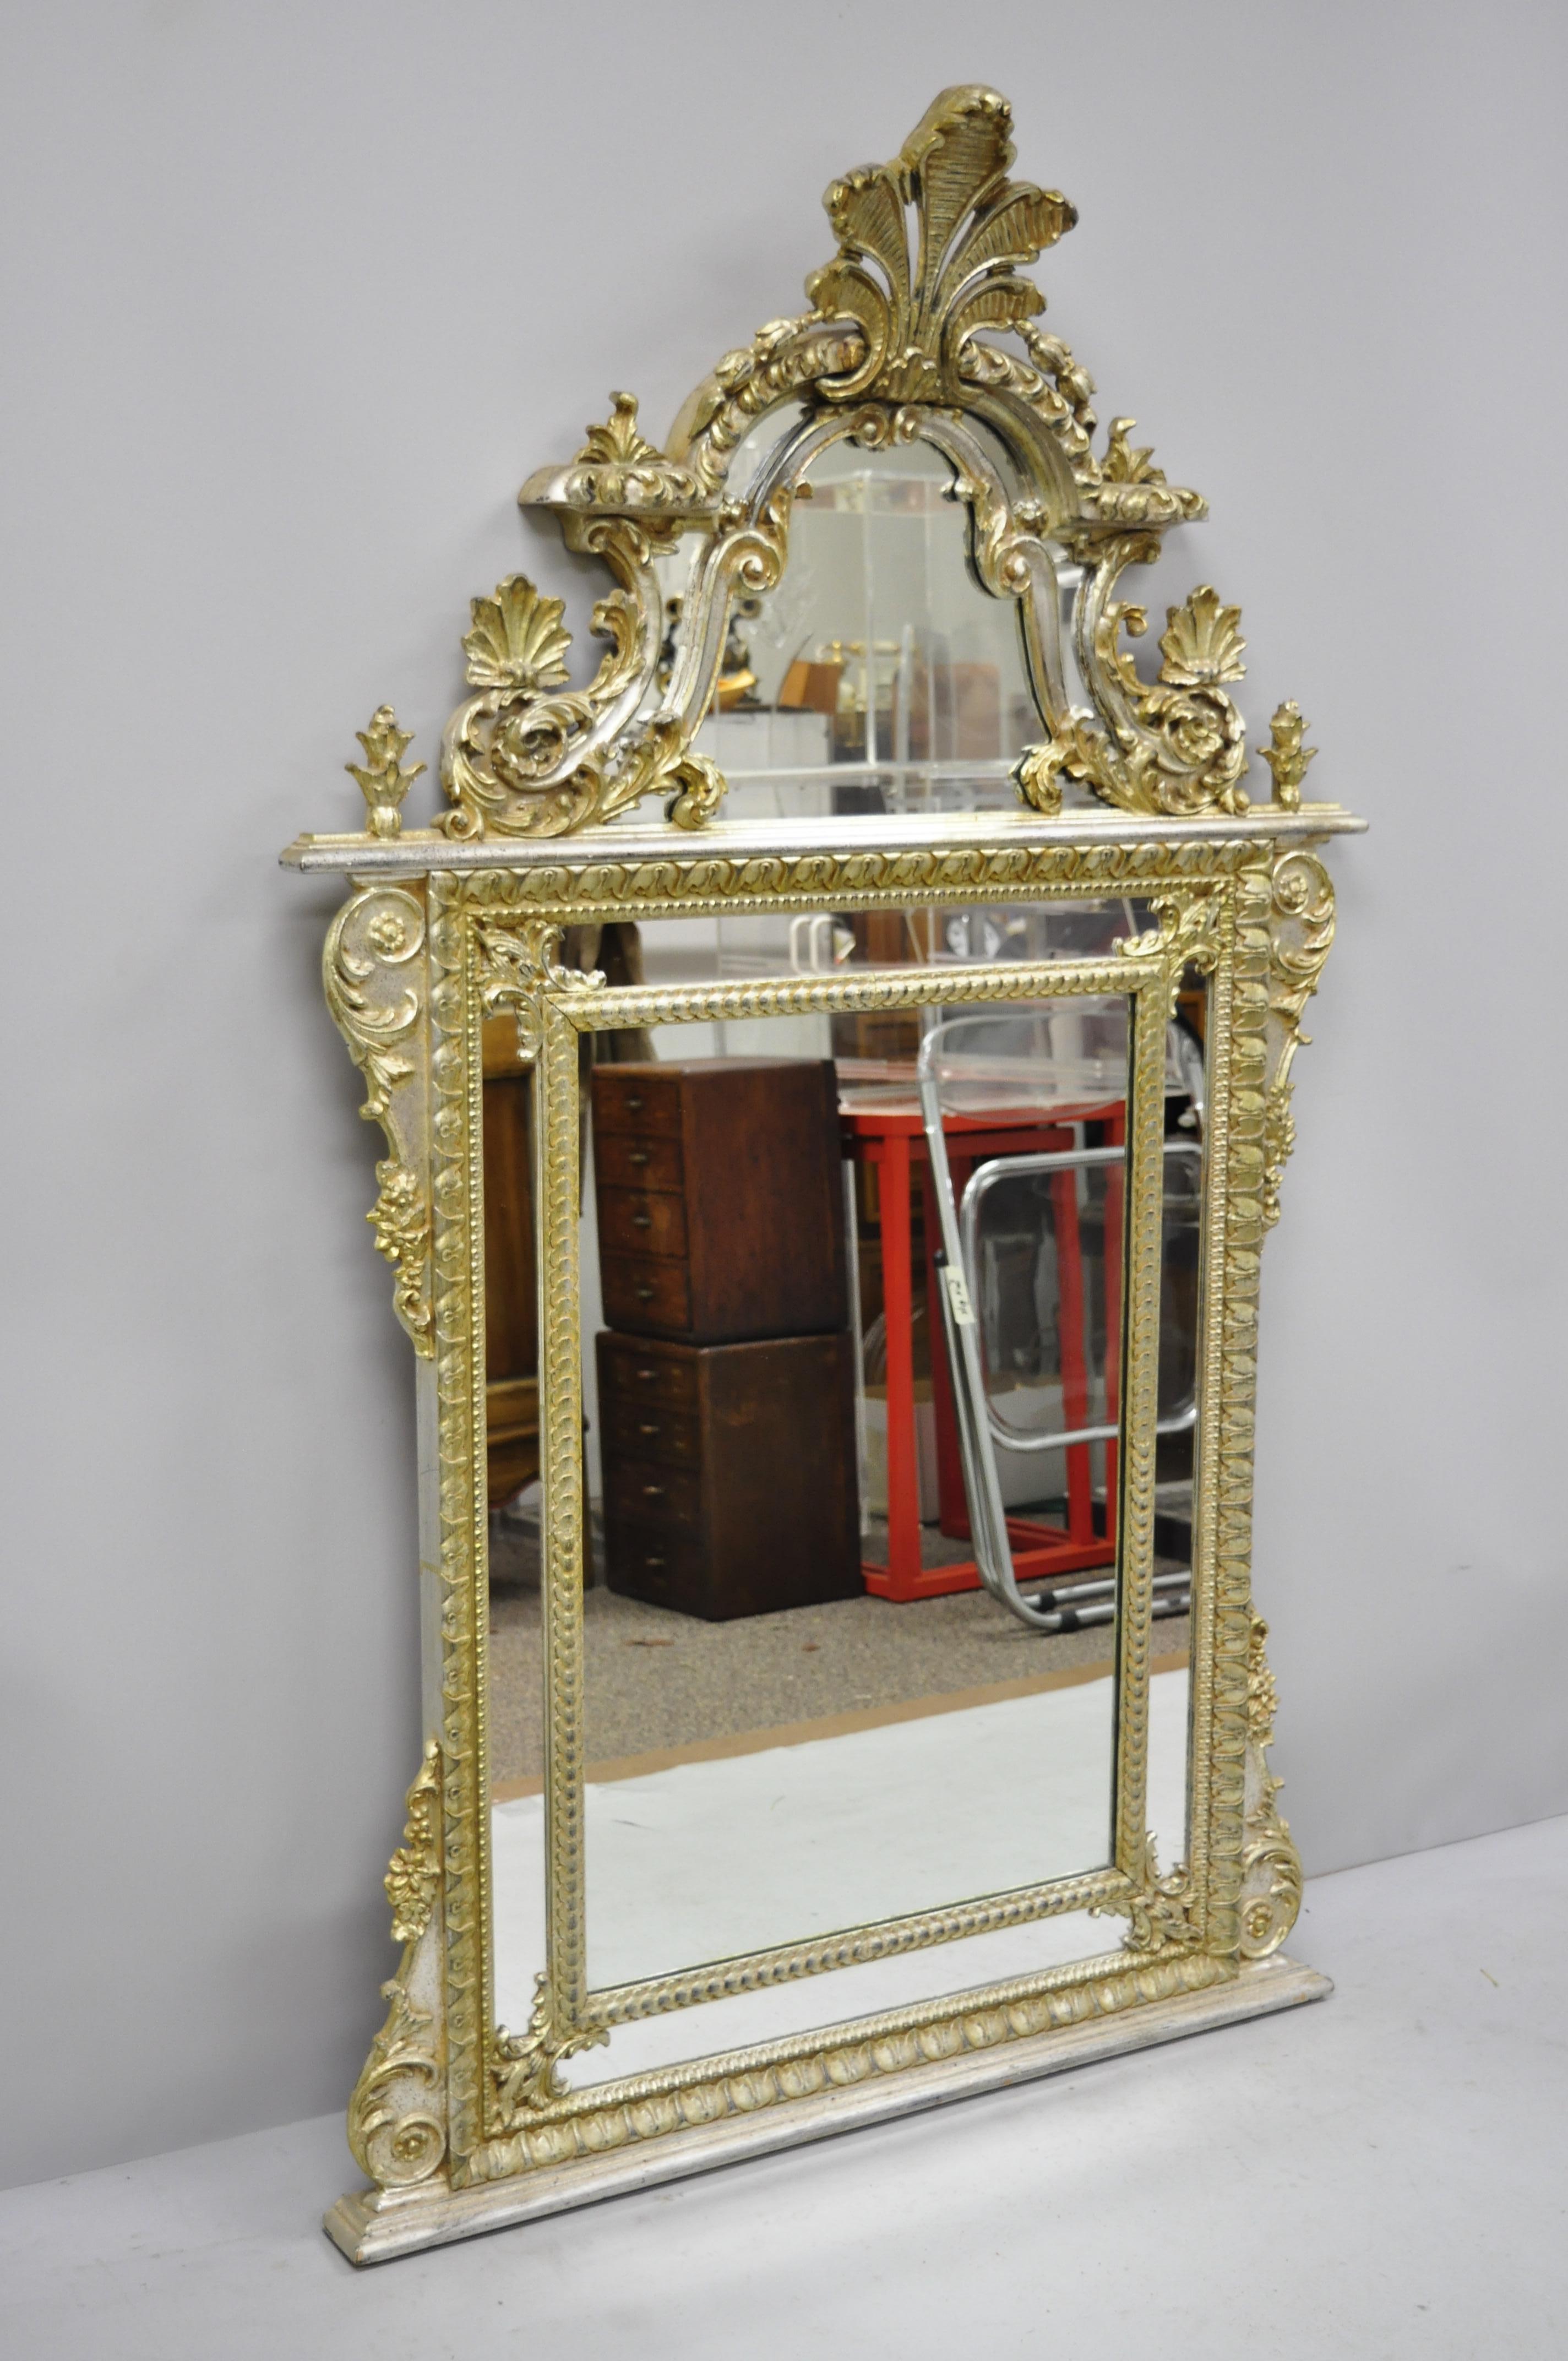 Labarge French Rococo Louis XV style silver giltwood Trumeau console mirror. Item features large giltwood frame, silver gilt finish, ornate carved scrollwork, original label, great style and form, circa late 20th century. Measurements: 62